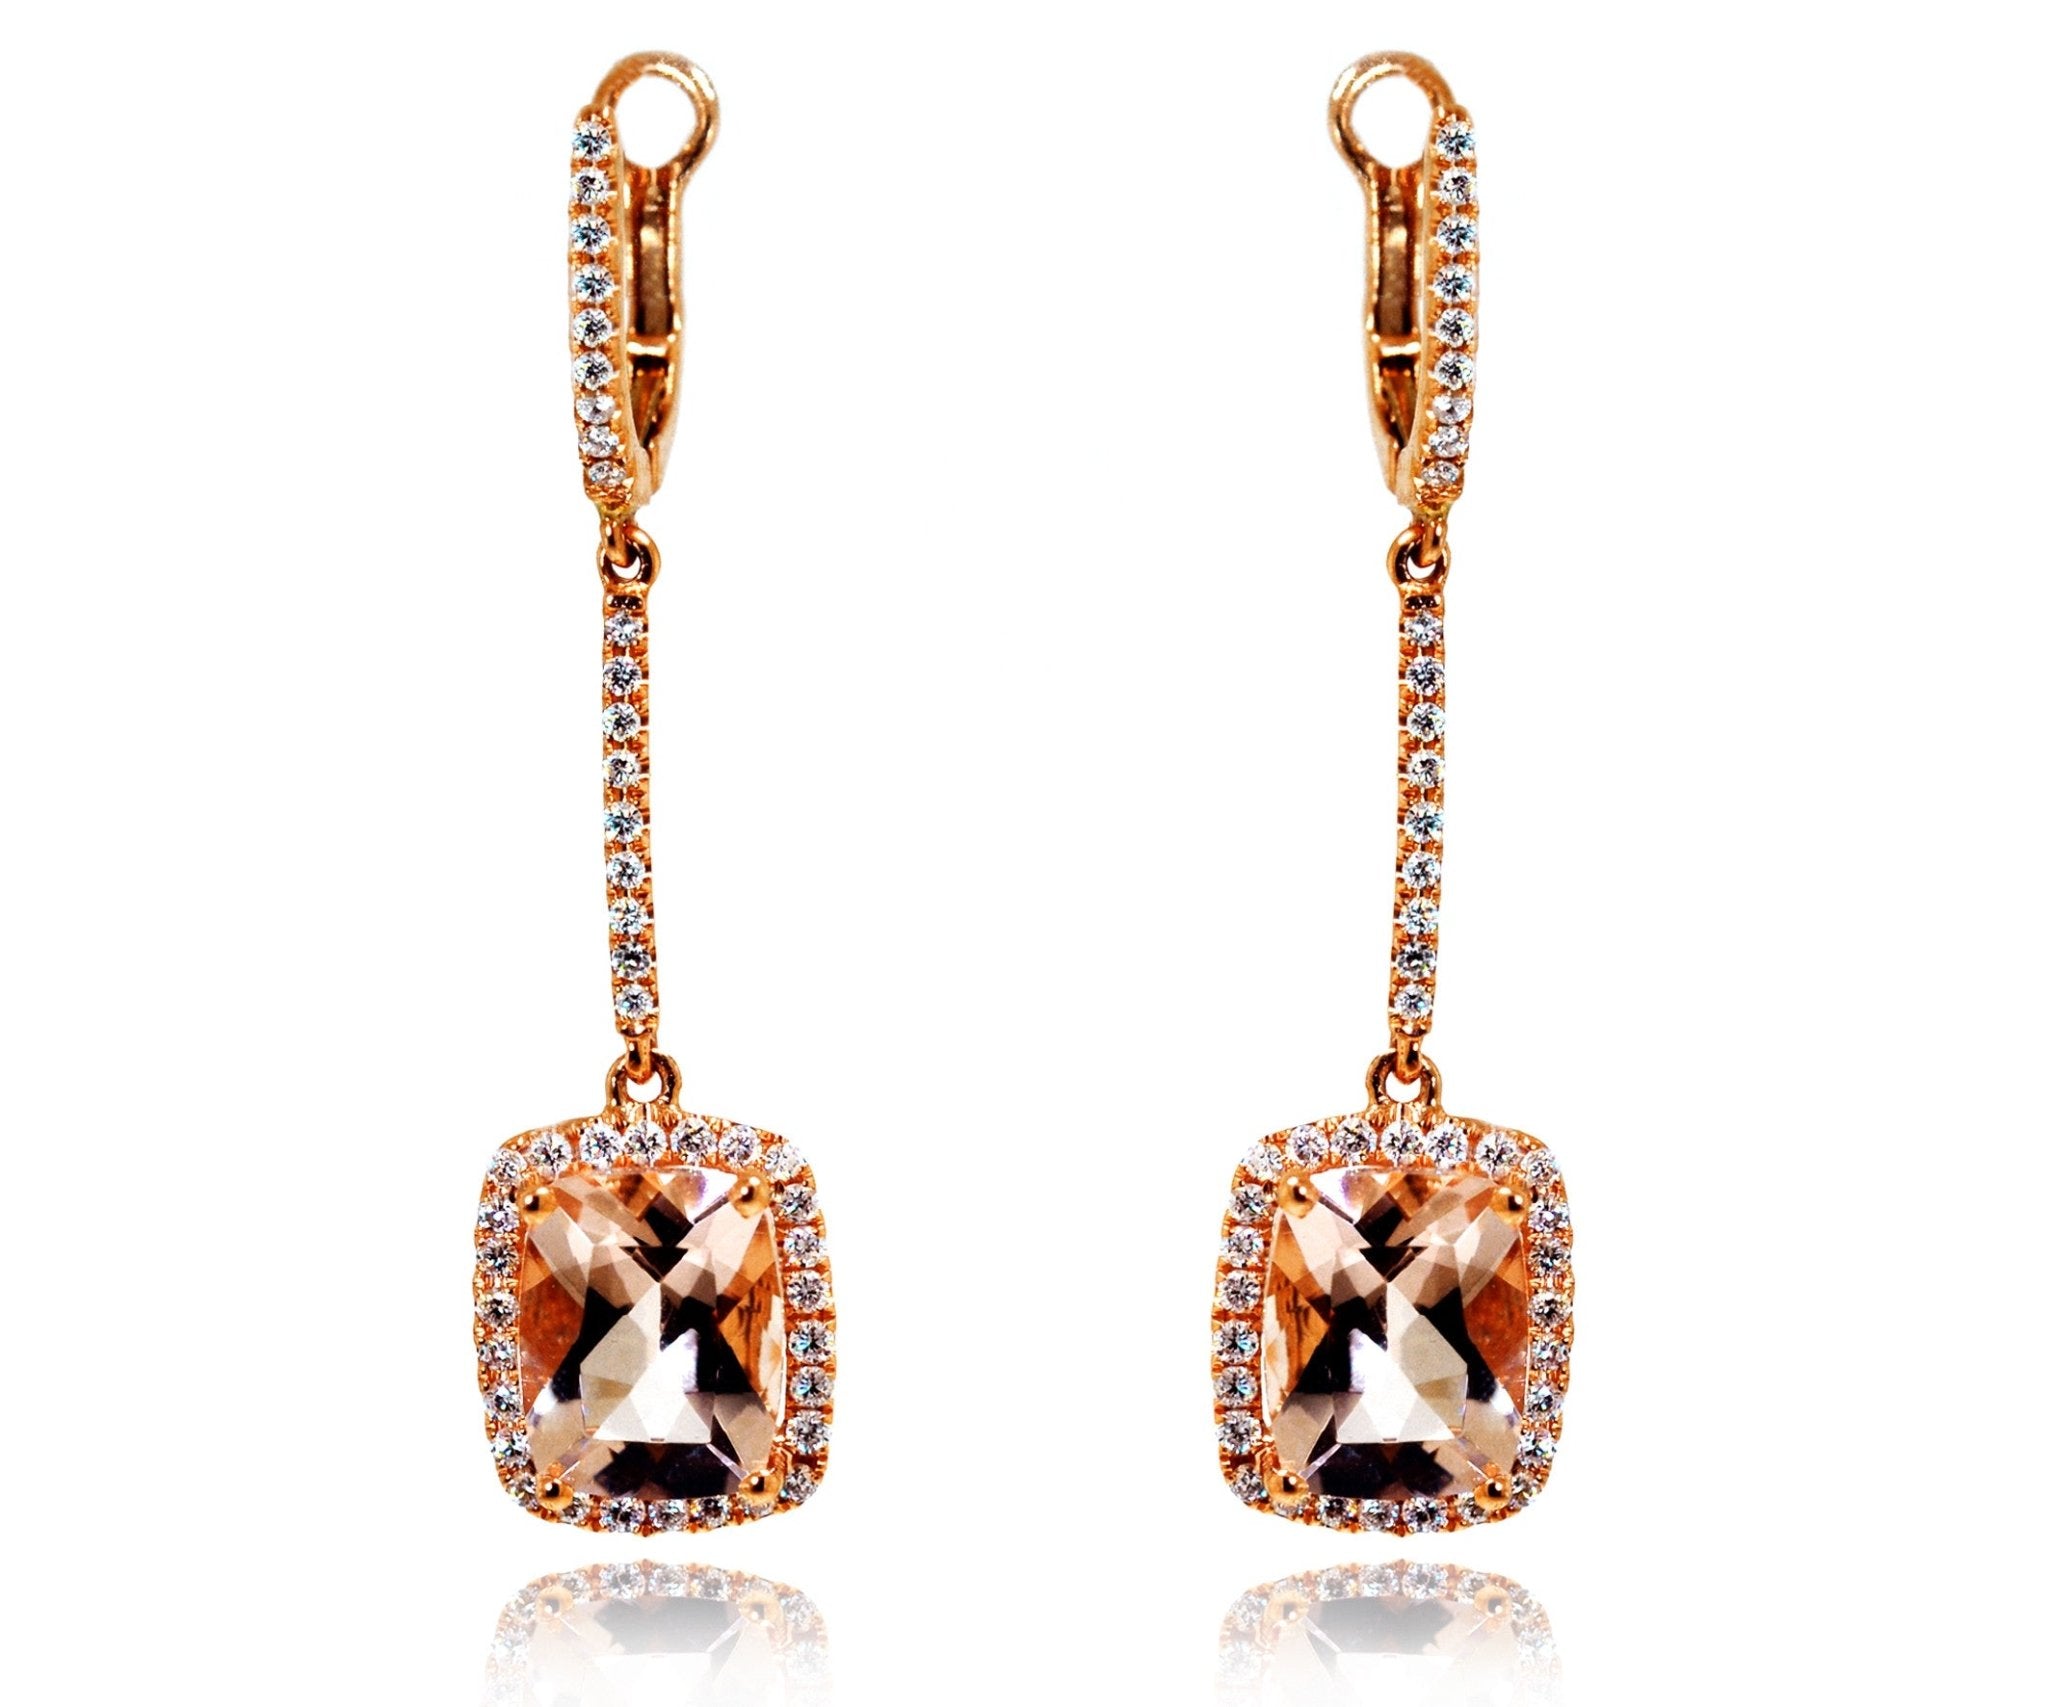 18ct Rose Gold Cushion cut morganite earrings with a halo of diamonds - ForeverJewels Design Studio 8